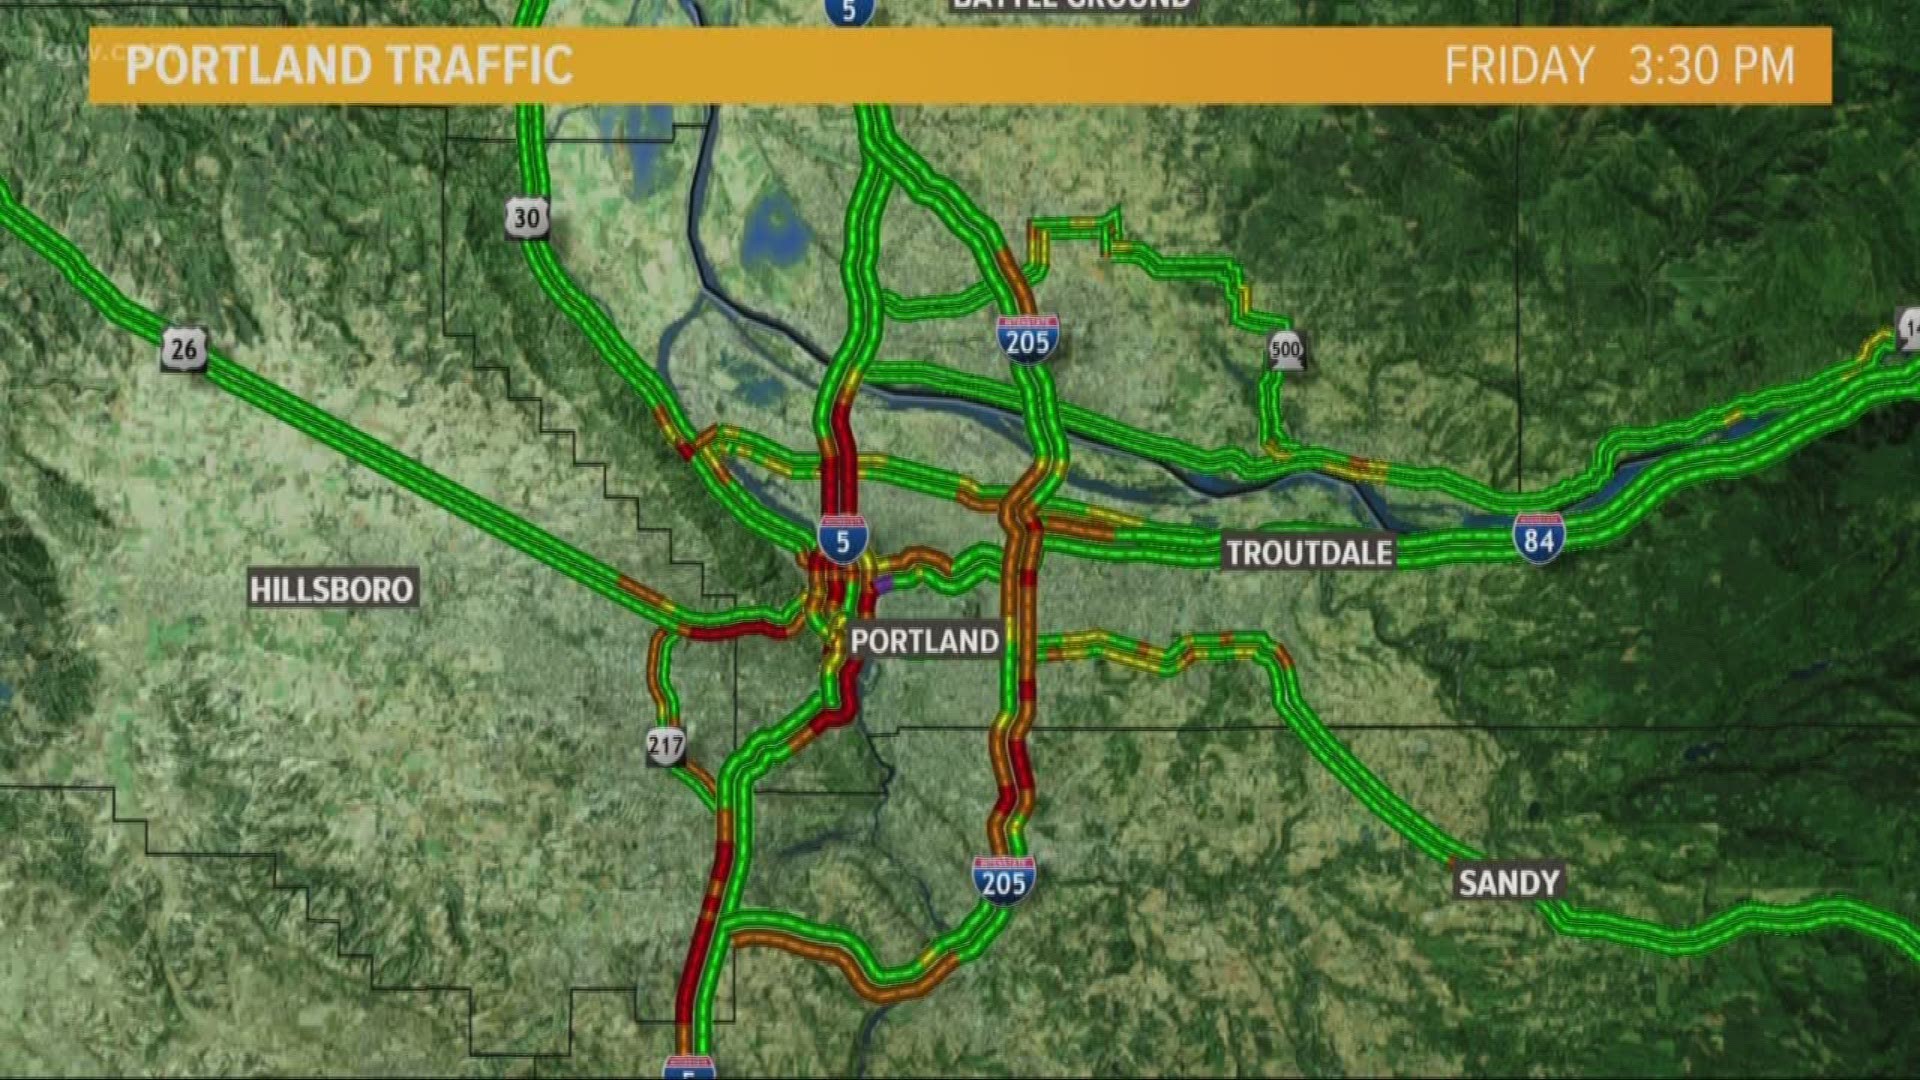 Closures lead to traffic mess in Portland metro area